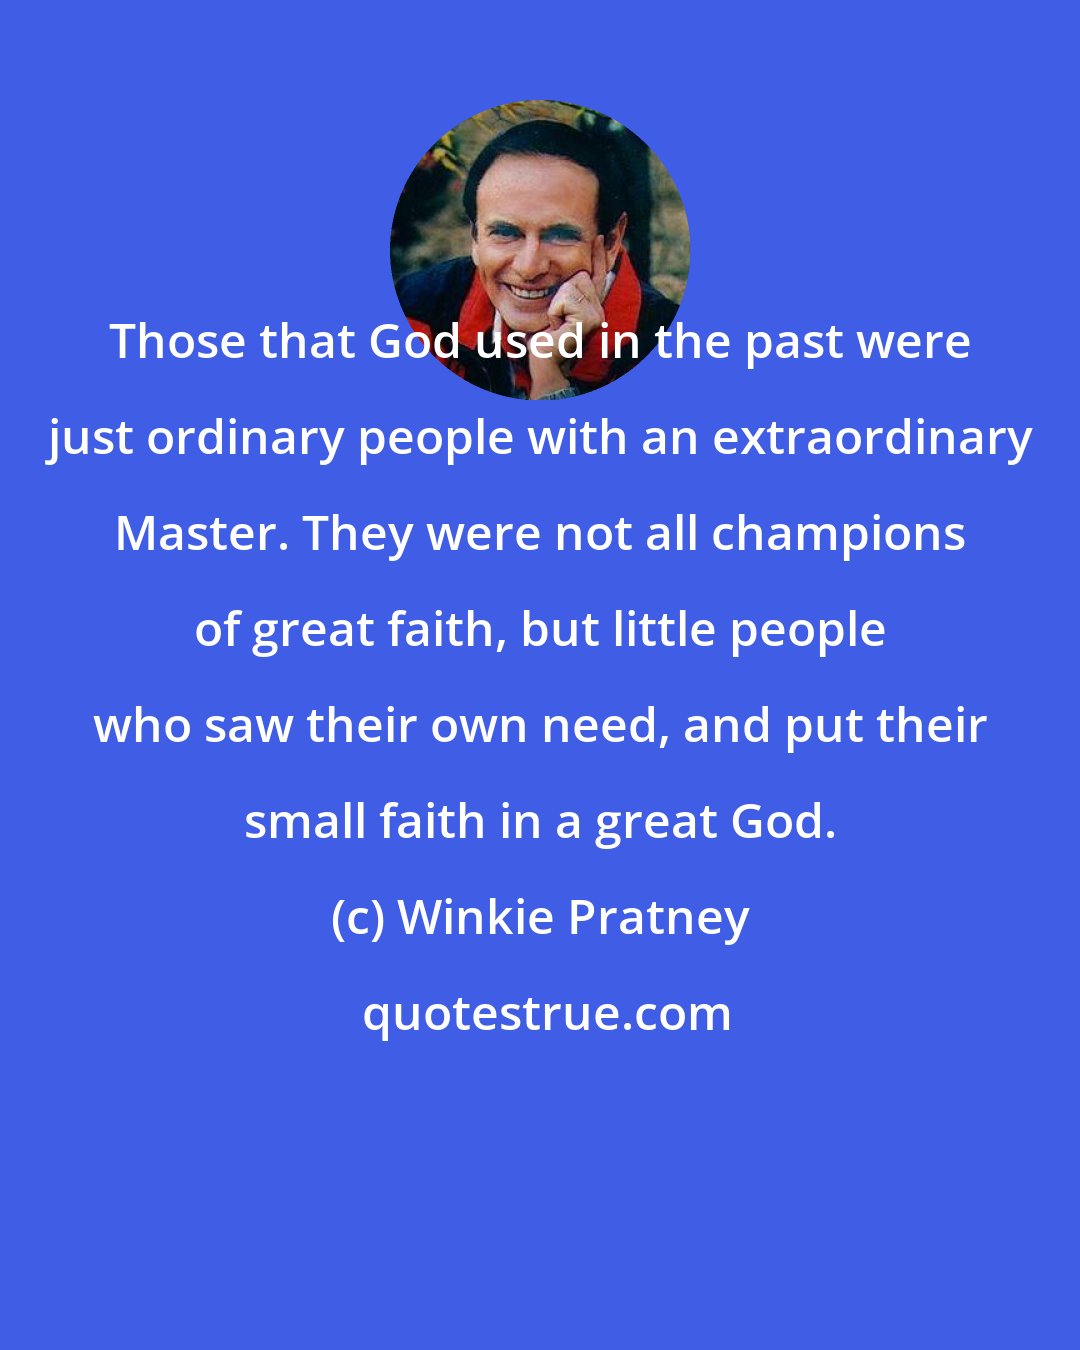 Winkie Pratney: Those that God used in the past were just ordinary people with an extraordinary Master. They were not all champions of great faith, but little people who saw their own need, and put their small faith in a great God.